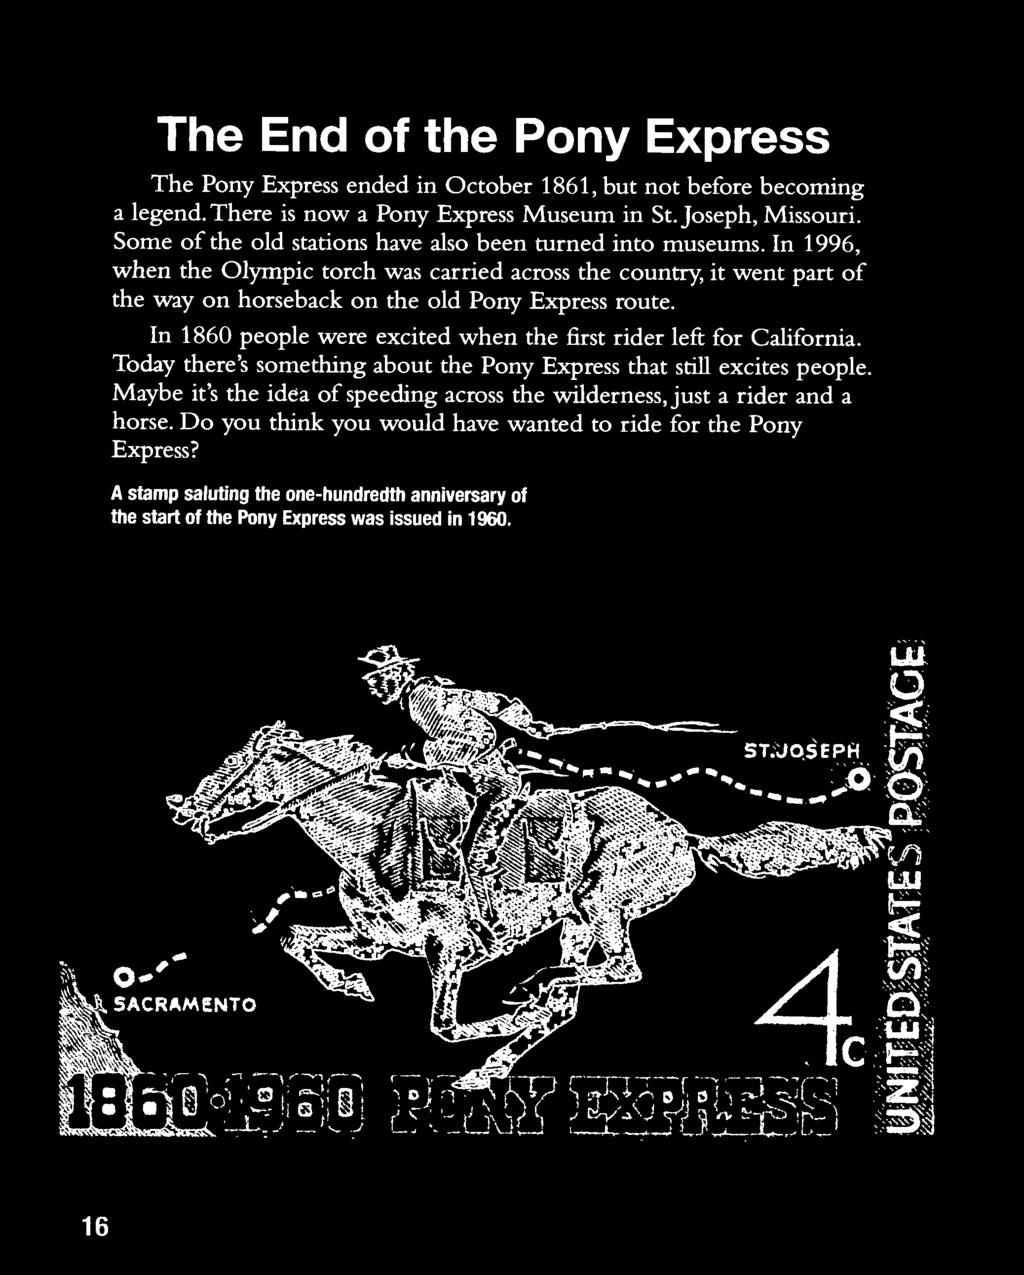 Today there's something about the Pony Express that still excites people.